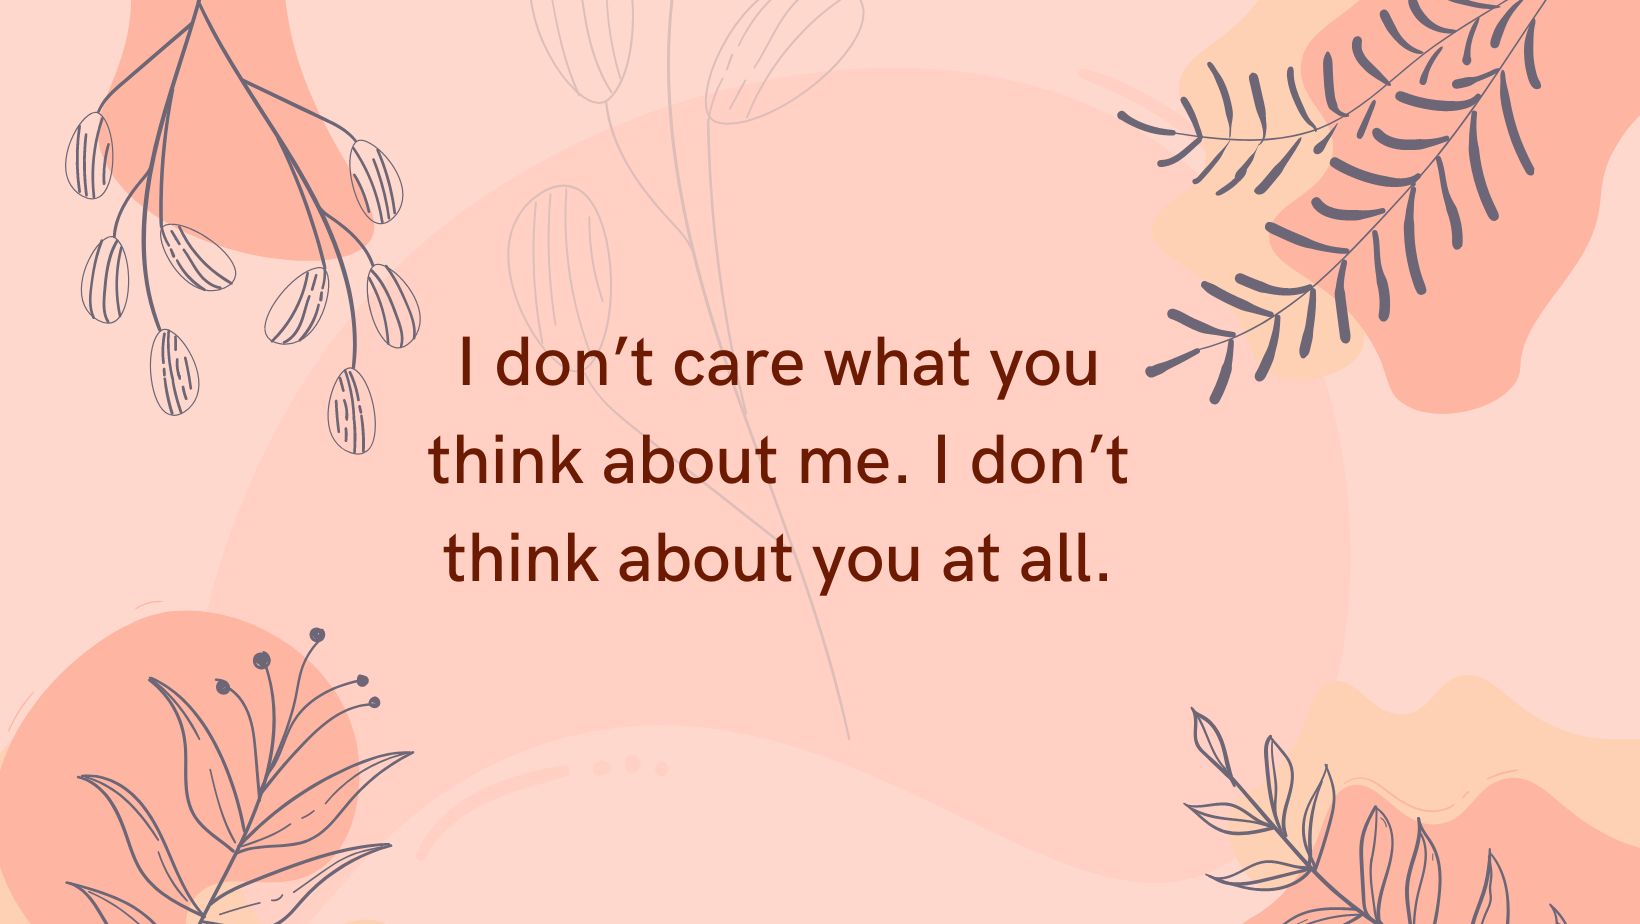 i don’t care what you think about me i don’t think about you at all